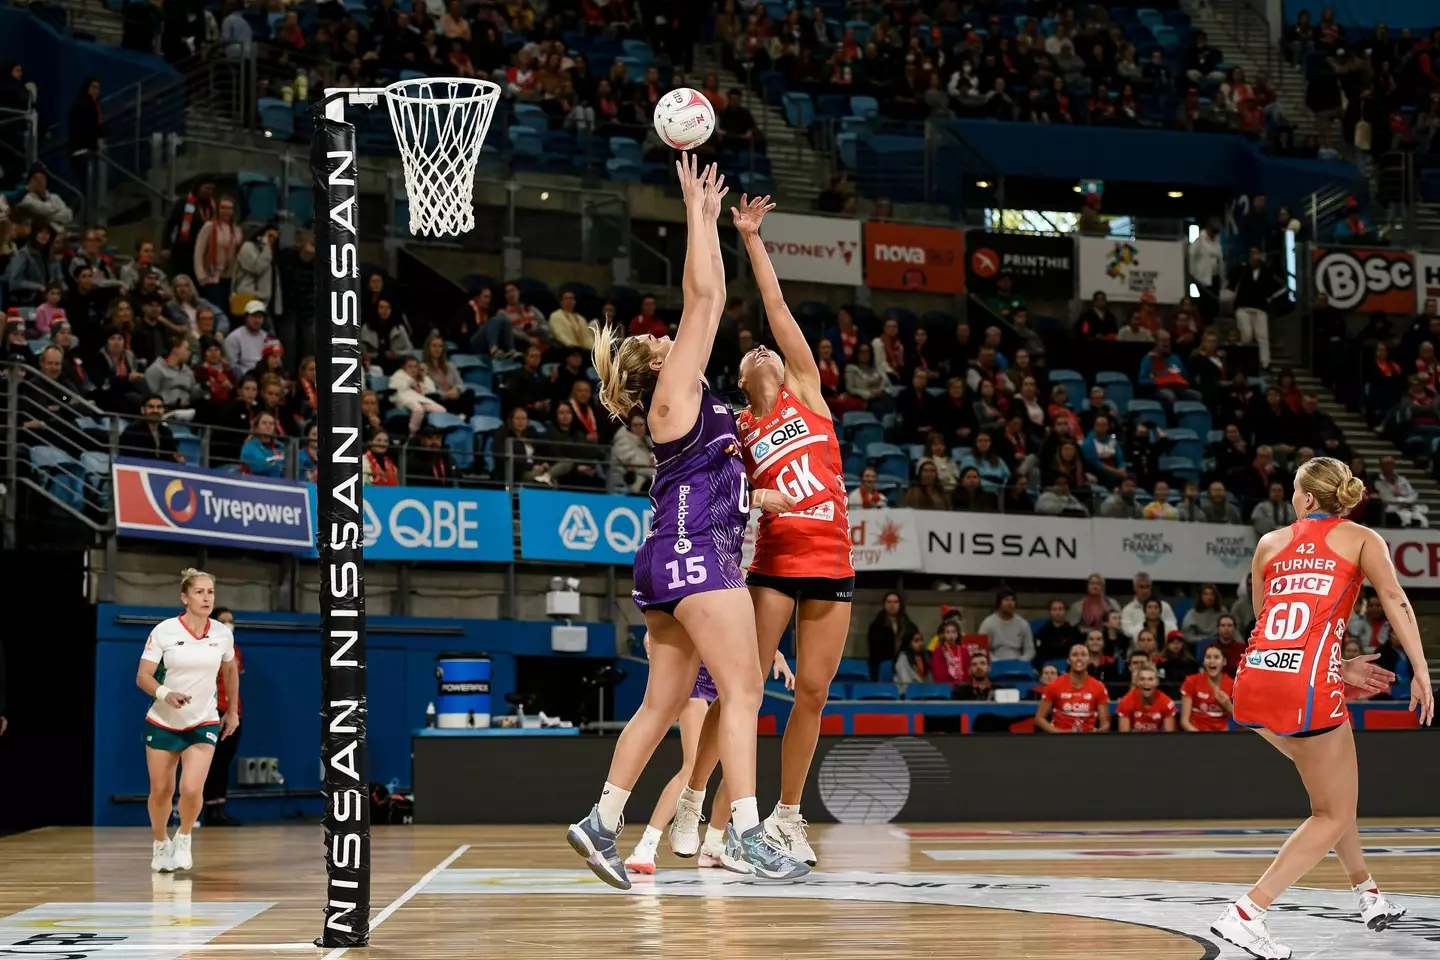 Donnell Wallam of the Queensland Firebirds and Sarah Klau of the Swifts compete for the high pass.